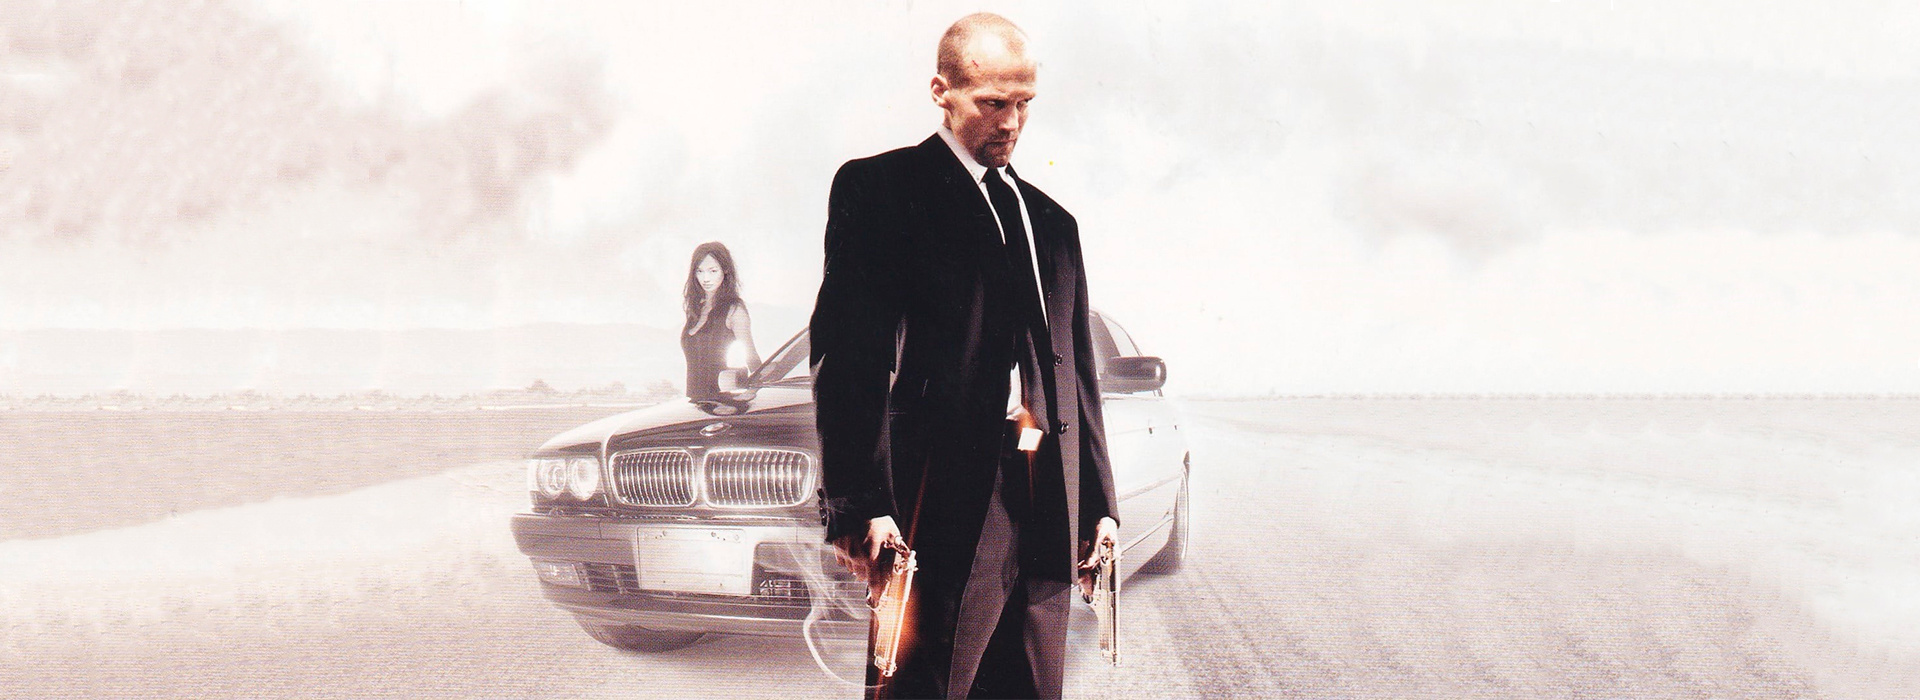 Movie poster The Transporter